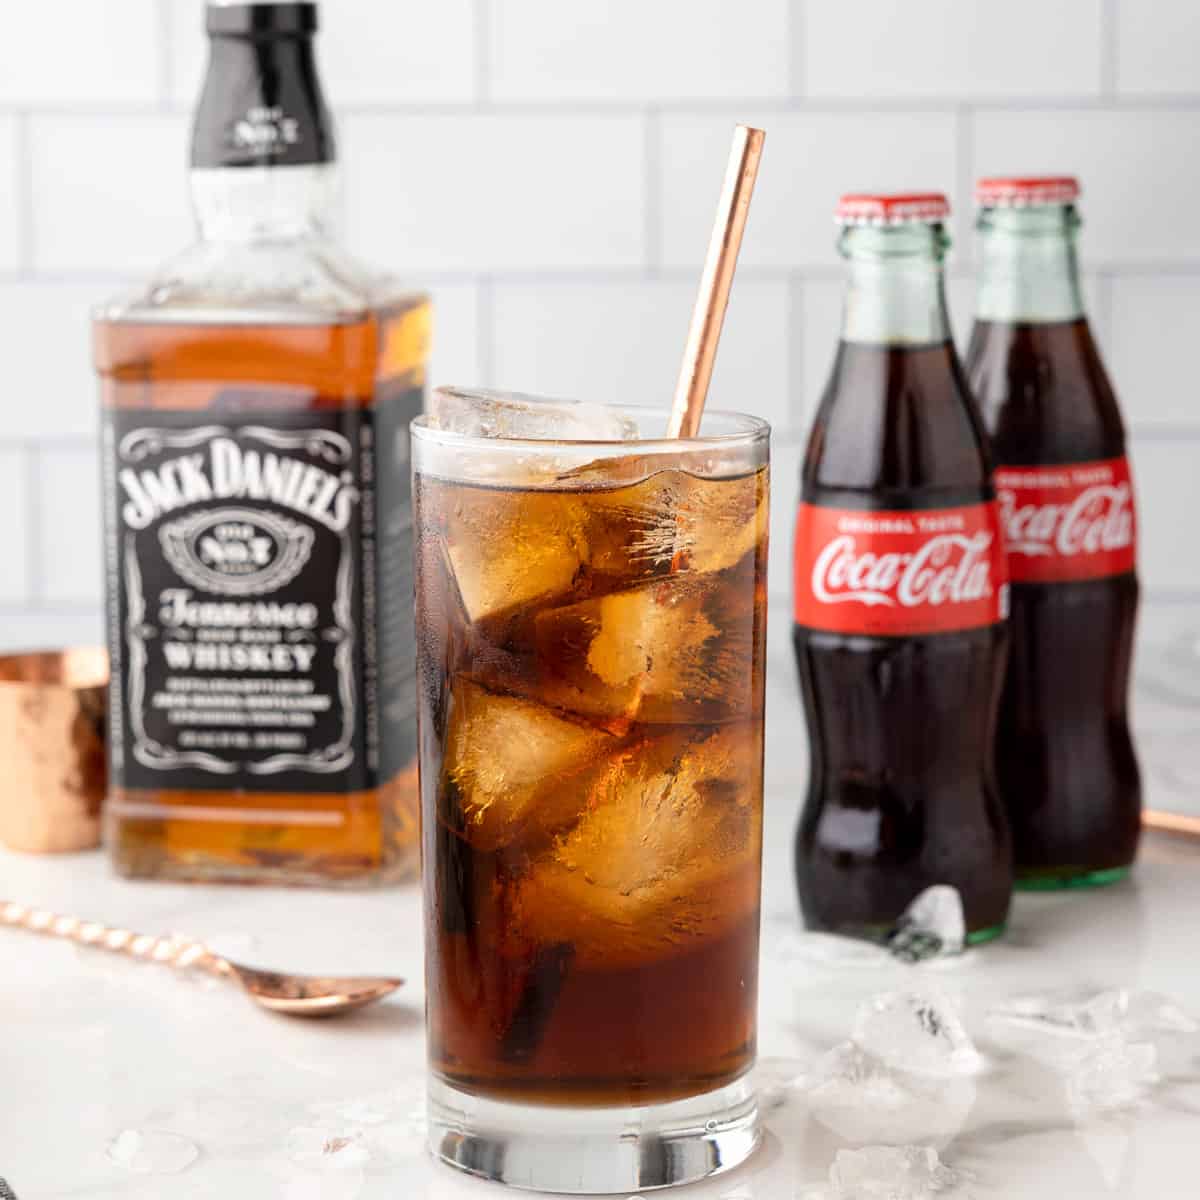 A jack and coke with bottle of Jack Daniels and 2 coke bottles.